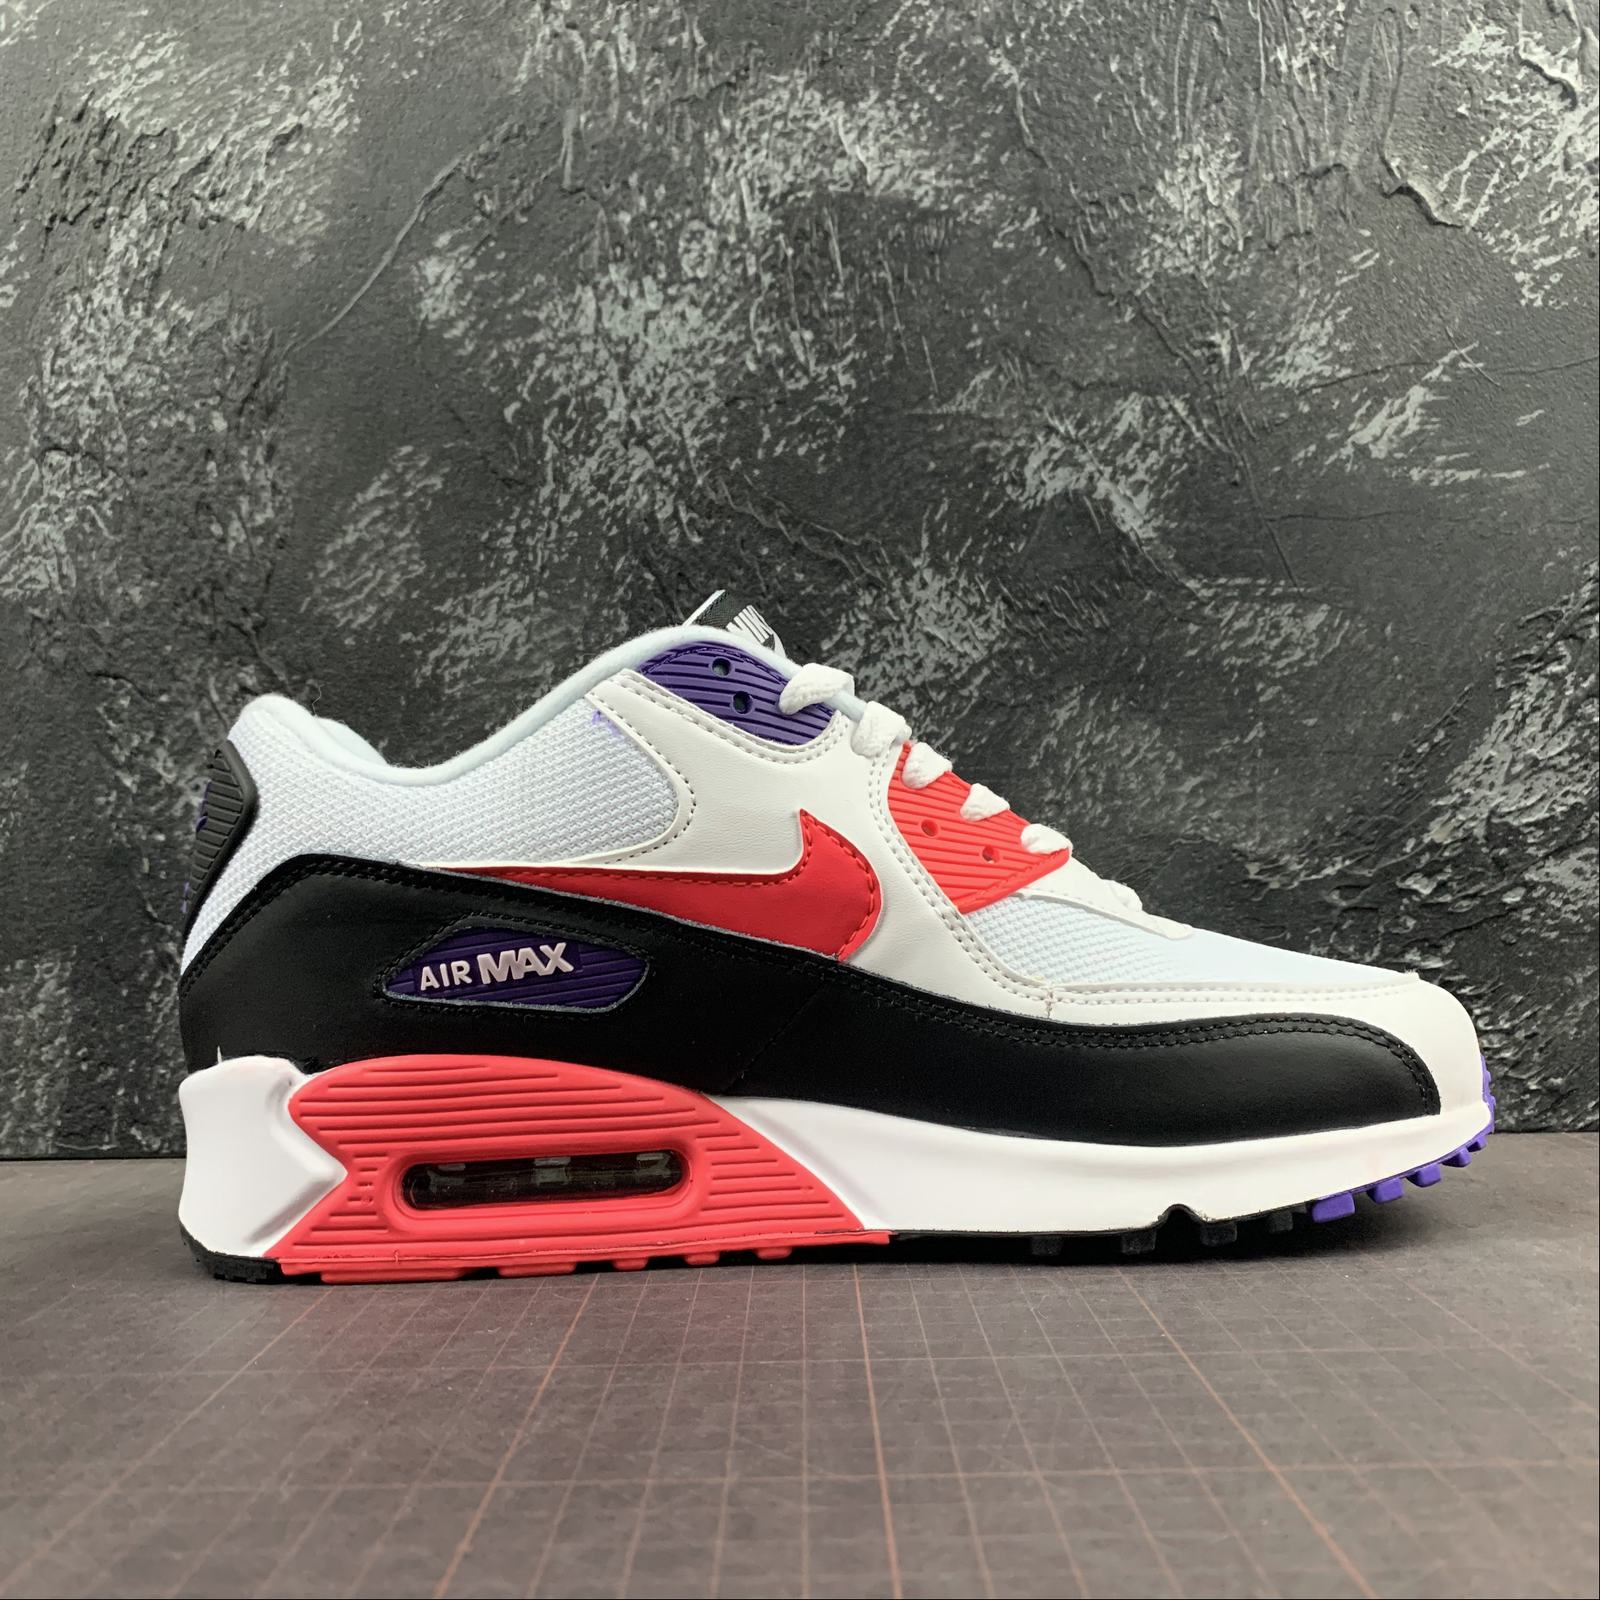 air max red white and black